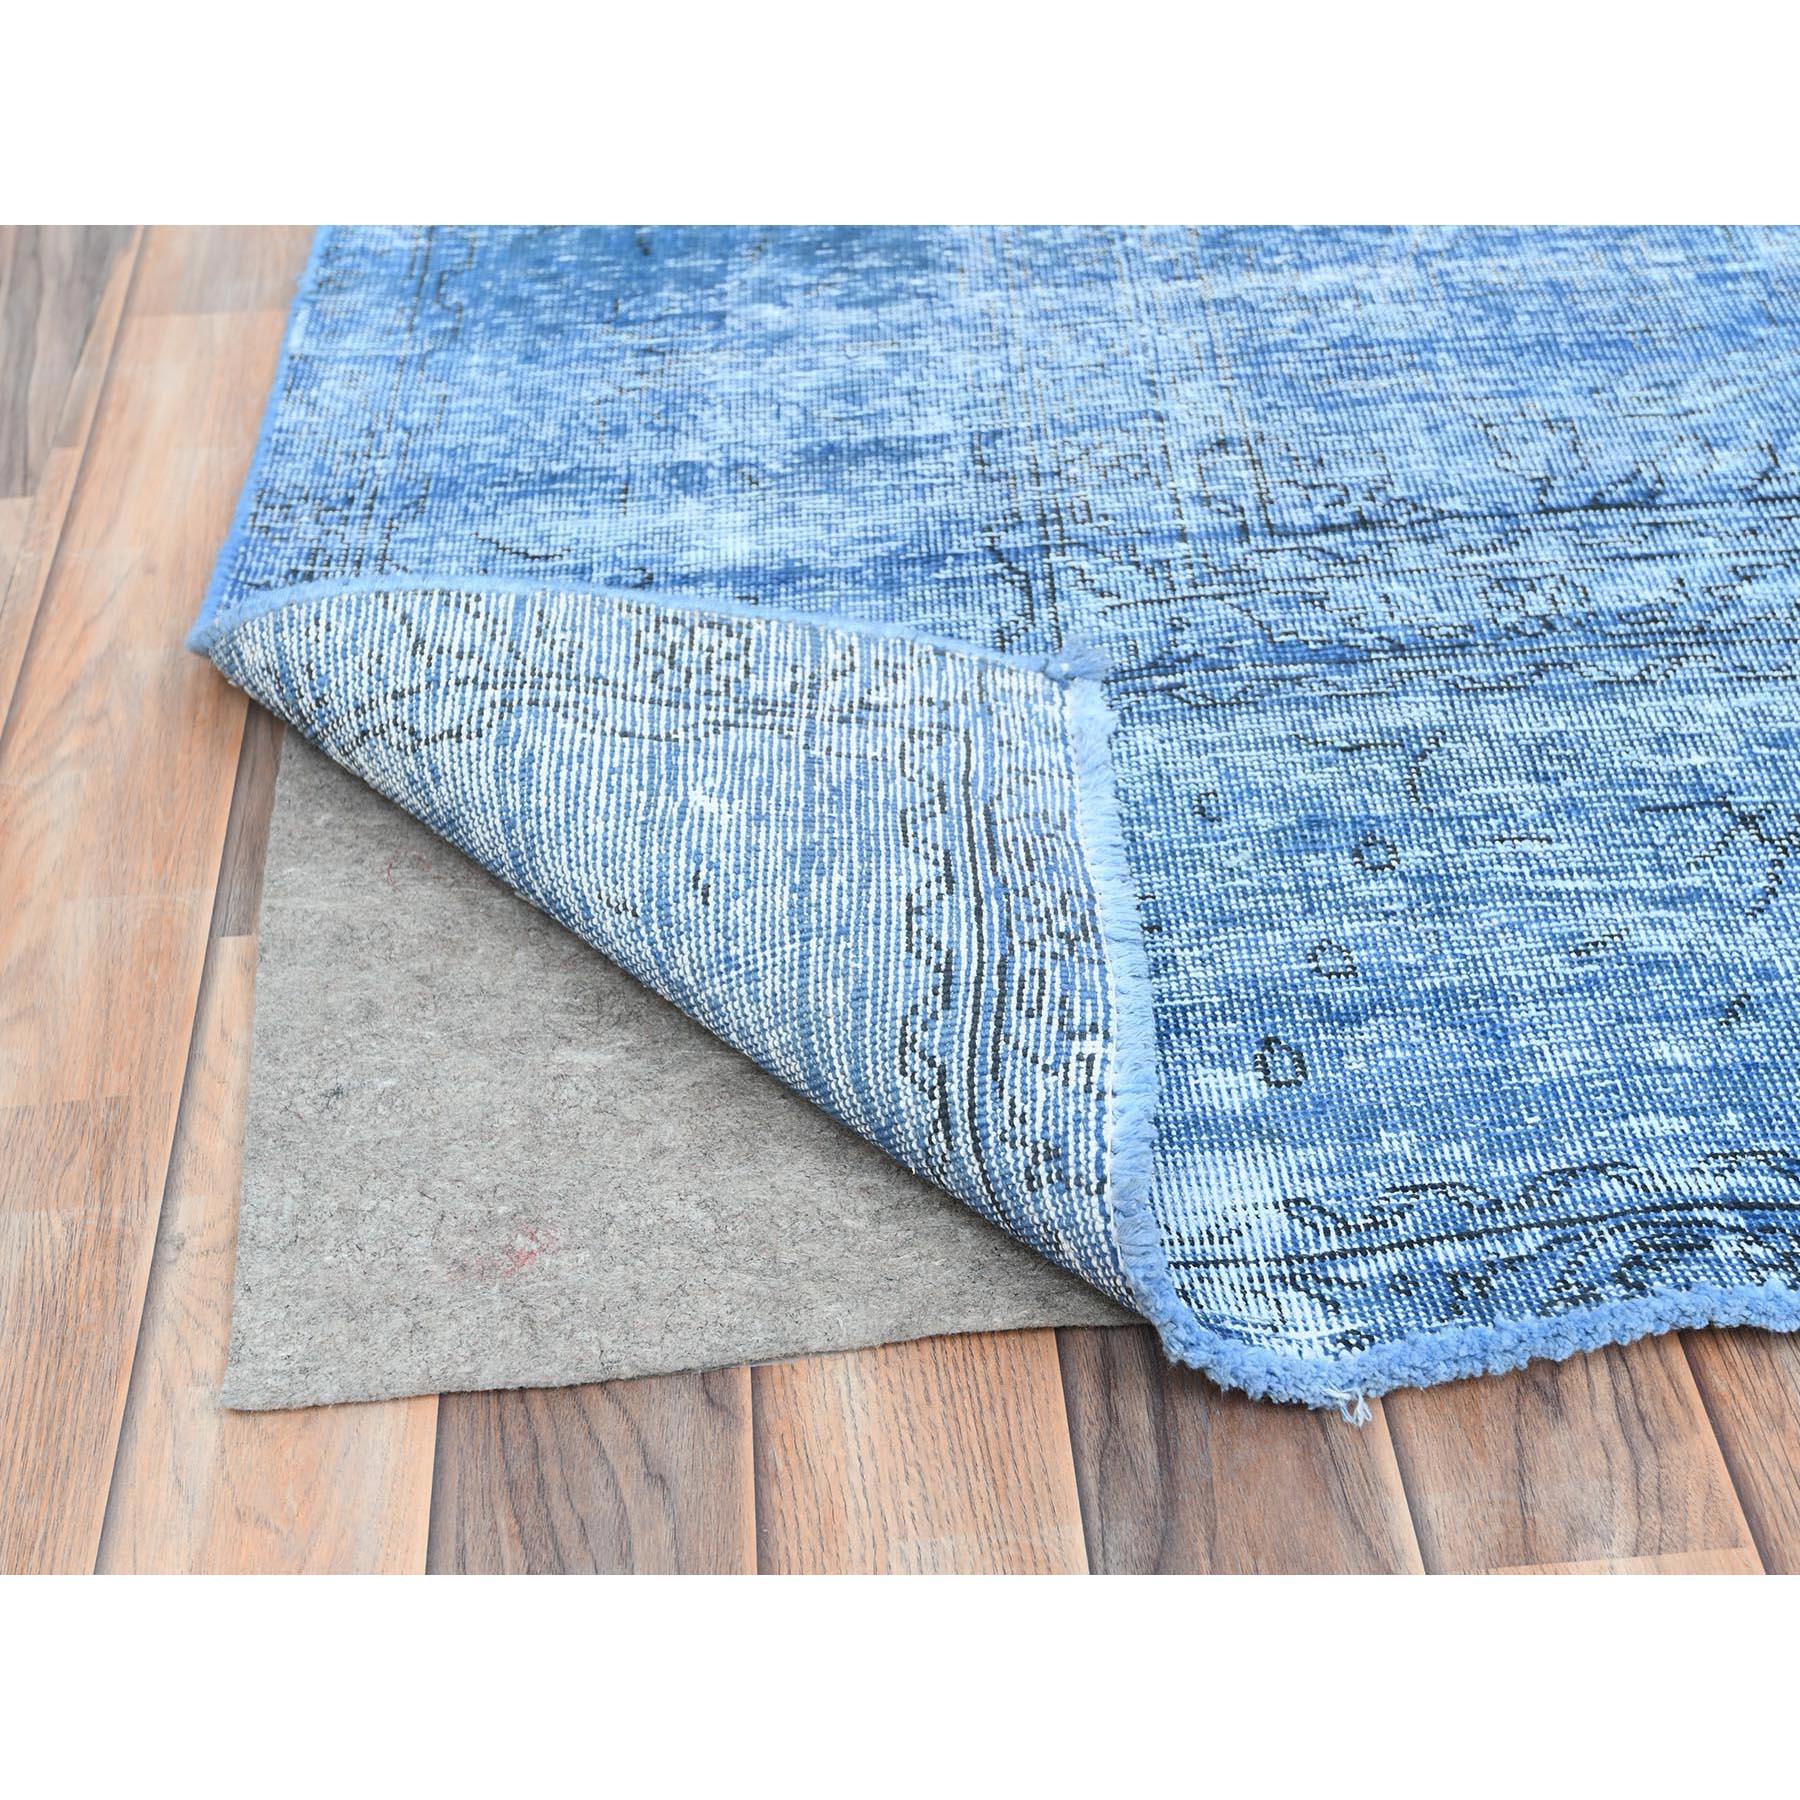 Hand-Knotted Denim Blue Old Persian Tabriz Worn Down Rustic Look Worn Wool Hand Knotted Rug For Sale